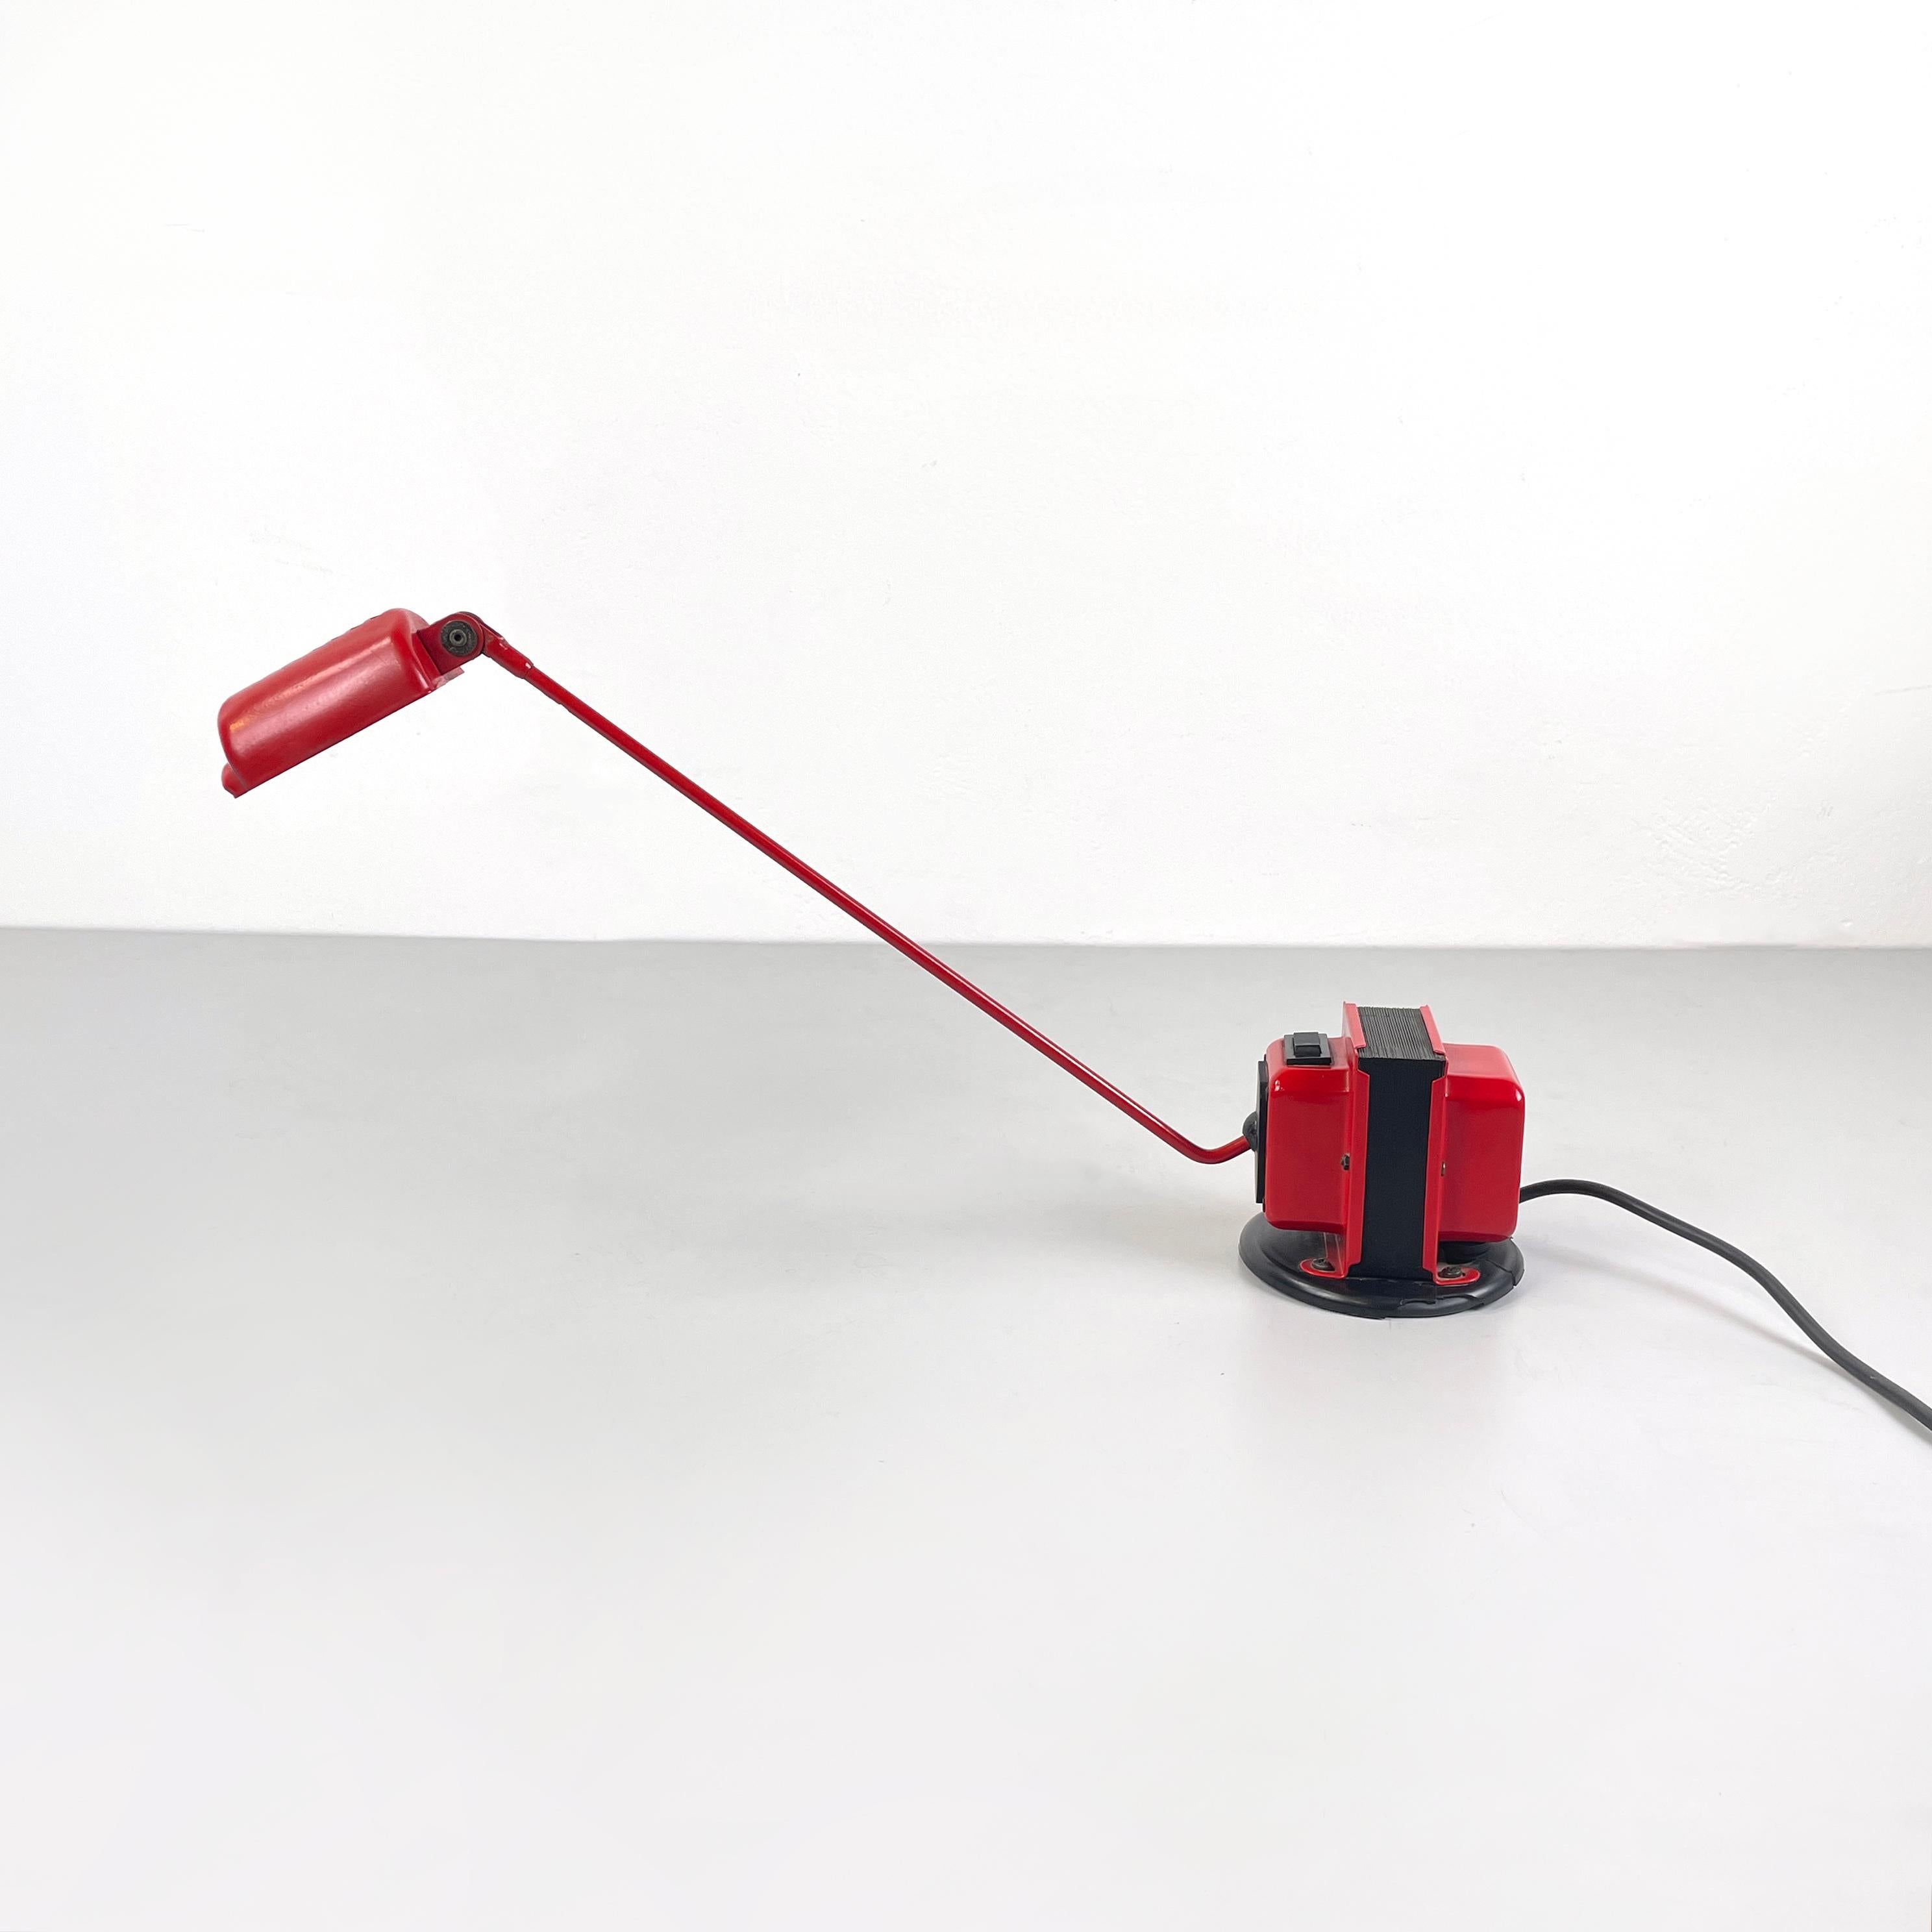 Italian modern red metal Adjustable t﻿able lamp Daphine by Tommaso Cimini for Lumina, 1980s
Adjustable t﻿able lamp mod. Daphine, in bright red painted metal. The semi-cylindrical diffuser is fully adjustable. The structure is composed of a arm with